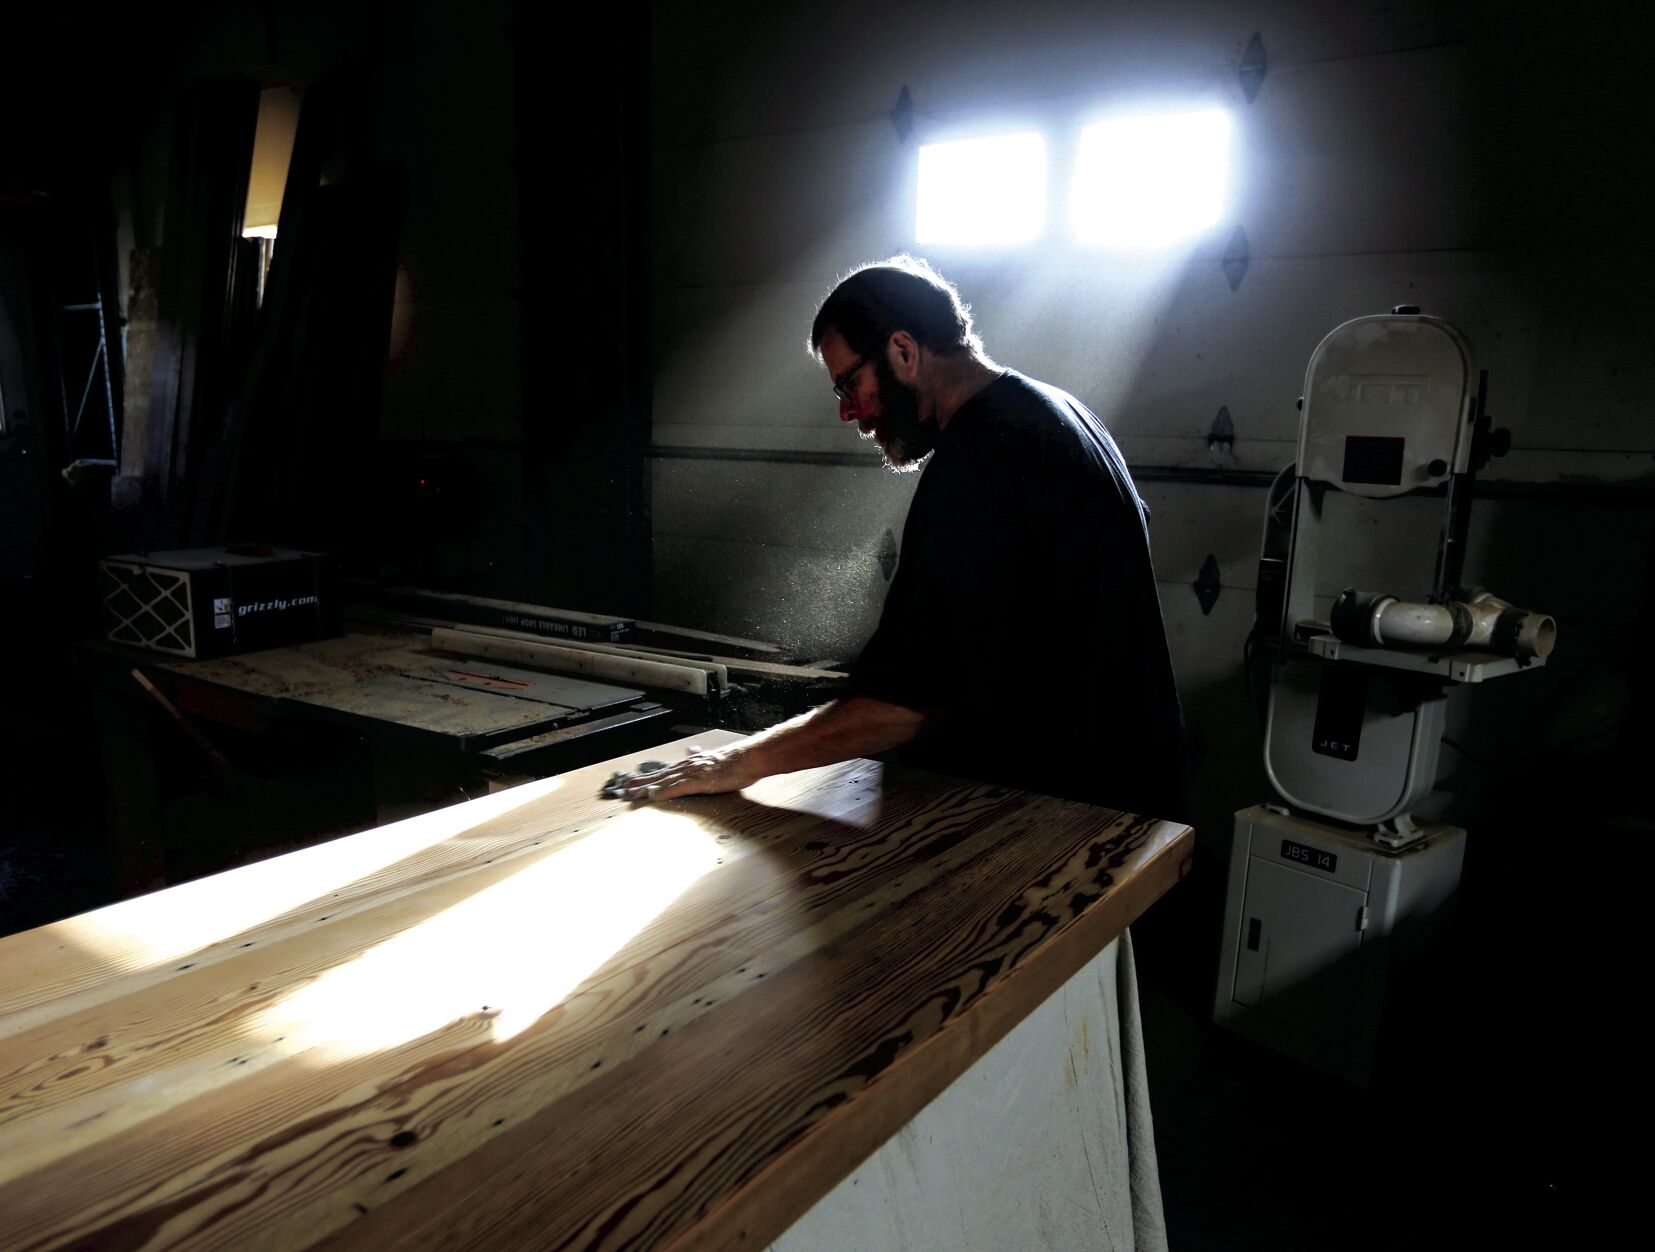 Randy Reeves works on a project in the woodworking shop at Renewed Visions — Across the Bridge in Manchester, Iowa, on Friday.    PHOTO CREDIT: Dave Kettering